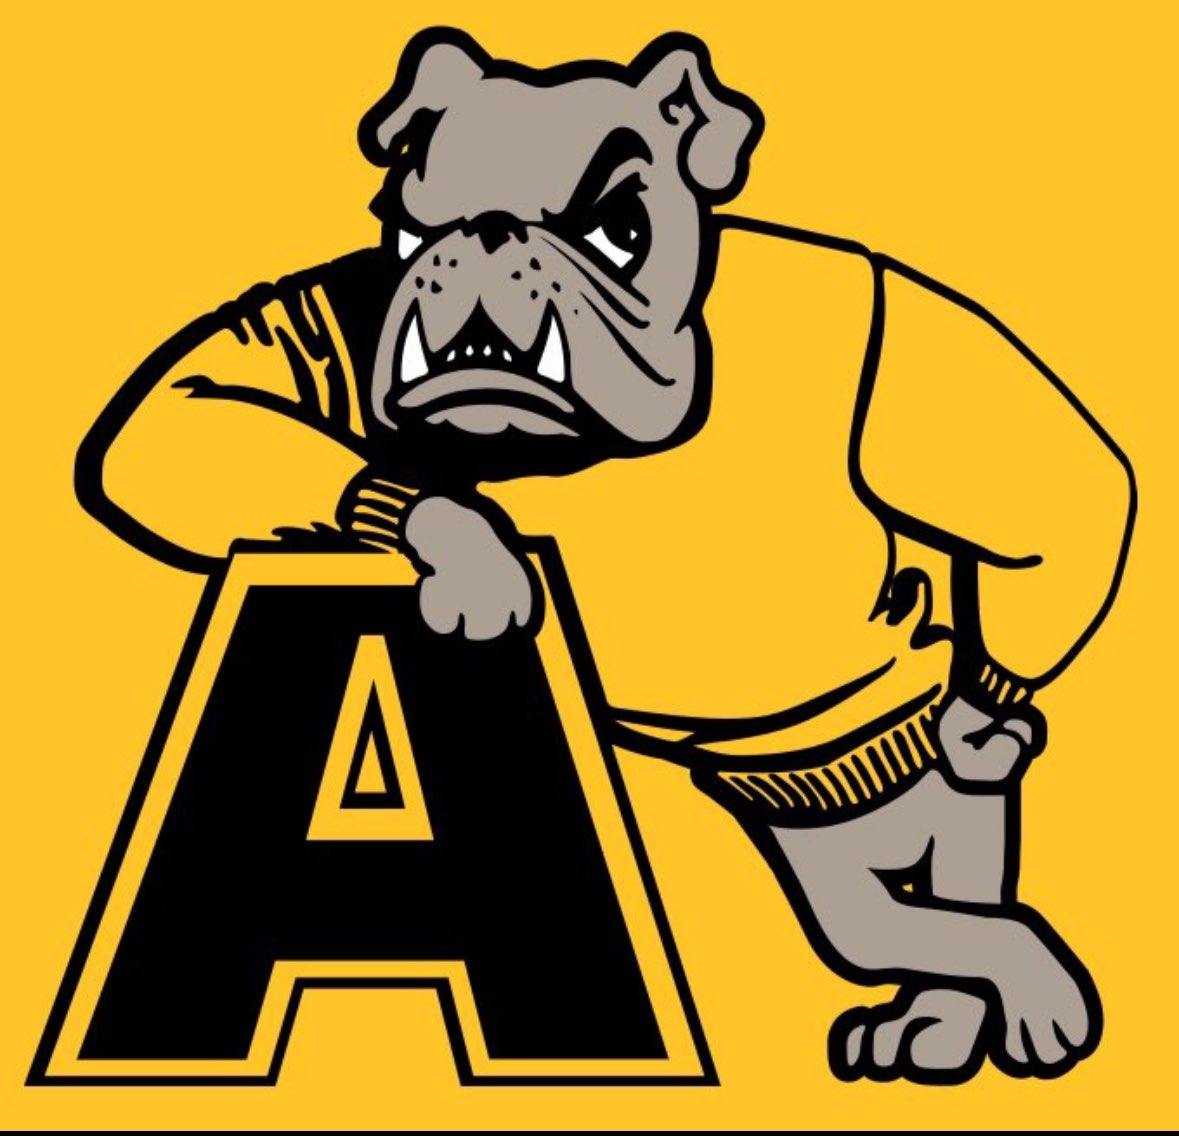 Blessed to announce that I have received my first offer from @AdrianCollege! I loved learning more about the program and meeting some of the girls on the team. Thanks again @Crawkatie23 and Coach Morris!